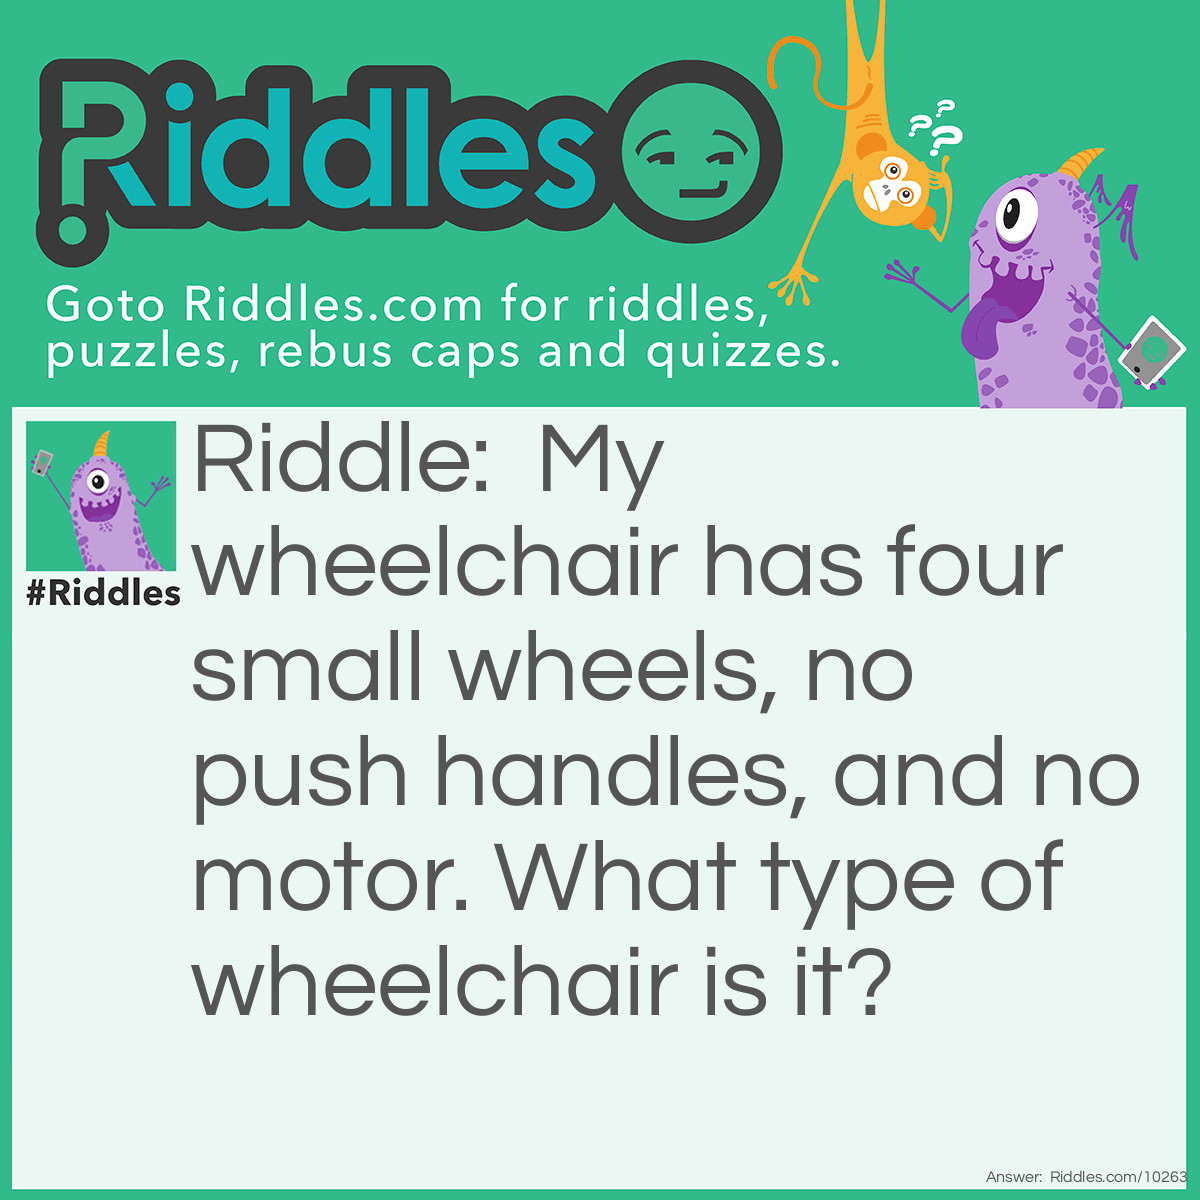 Riddle: My wheelchair has four small wheels, no push handles, and no motor. What type of wheelchair is it? Answer: An office chair with wheels